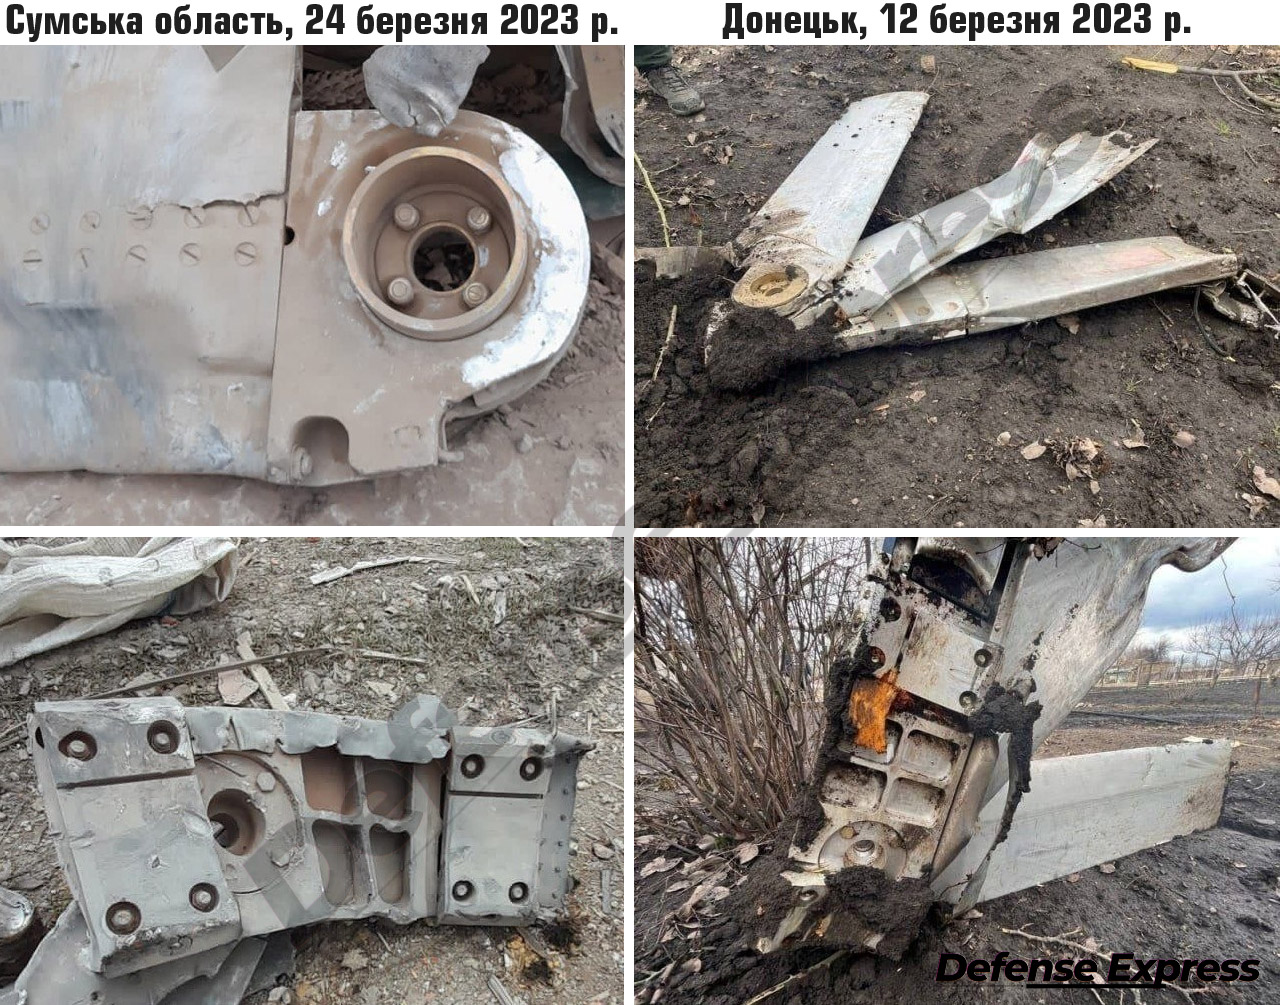 The wreckage of russian JDAM-ER analog in Sumy region on March 24, 2023, and in Donetsk on March 12, 2023 Defense Express Russia Attacked Sumy Region with the JDAM-ER Analog, Module for the Flight Control Elements Survived (photo)